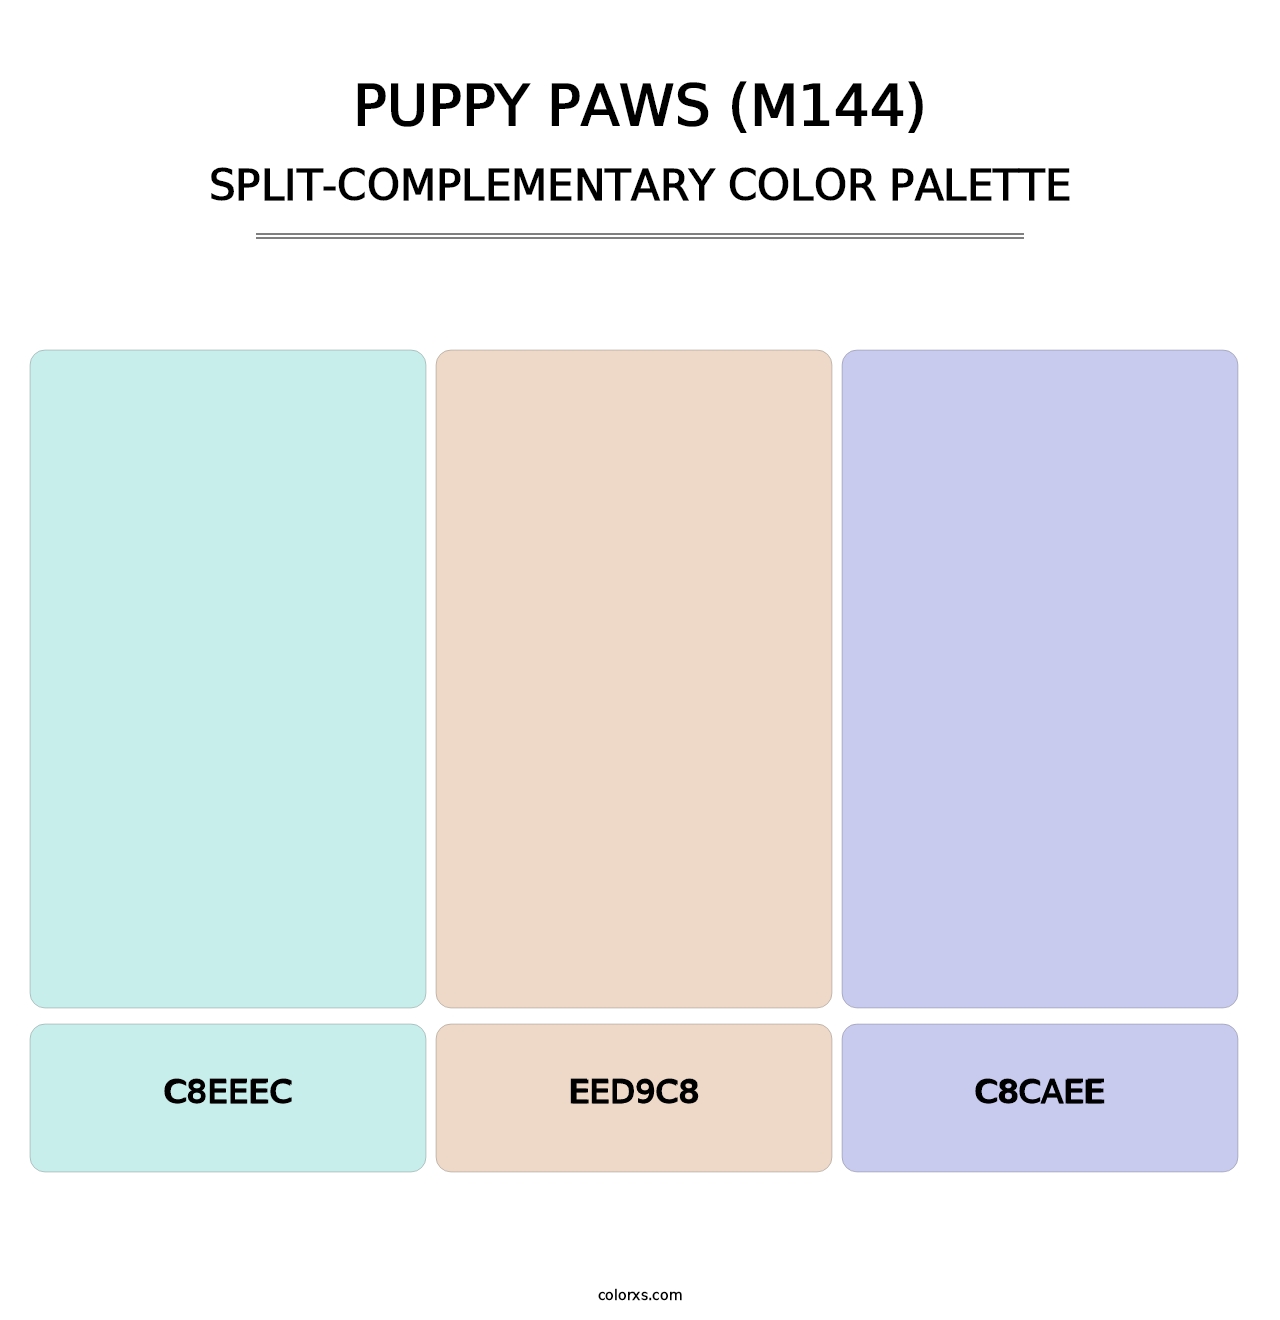 Puppy Paws (M144) - Split-Complementary Color Palette